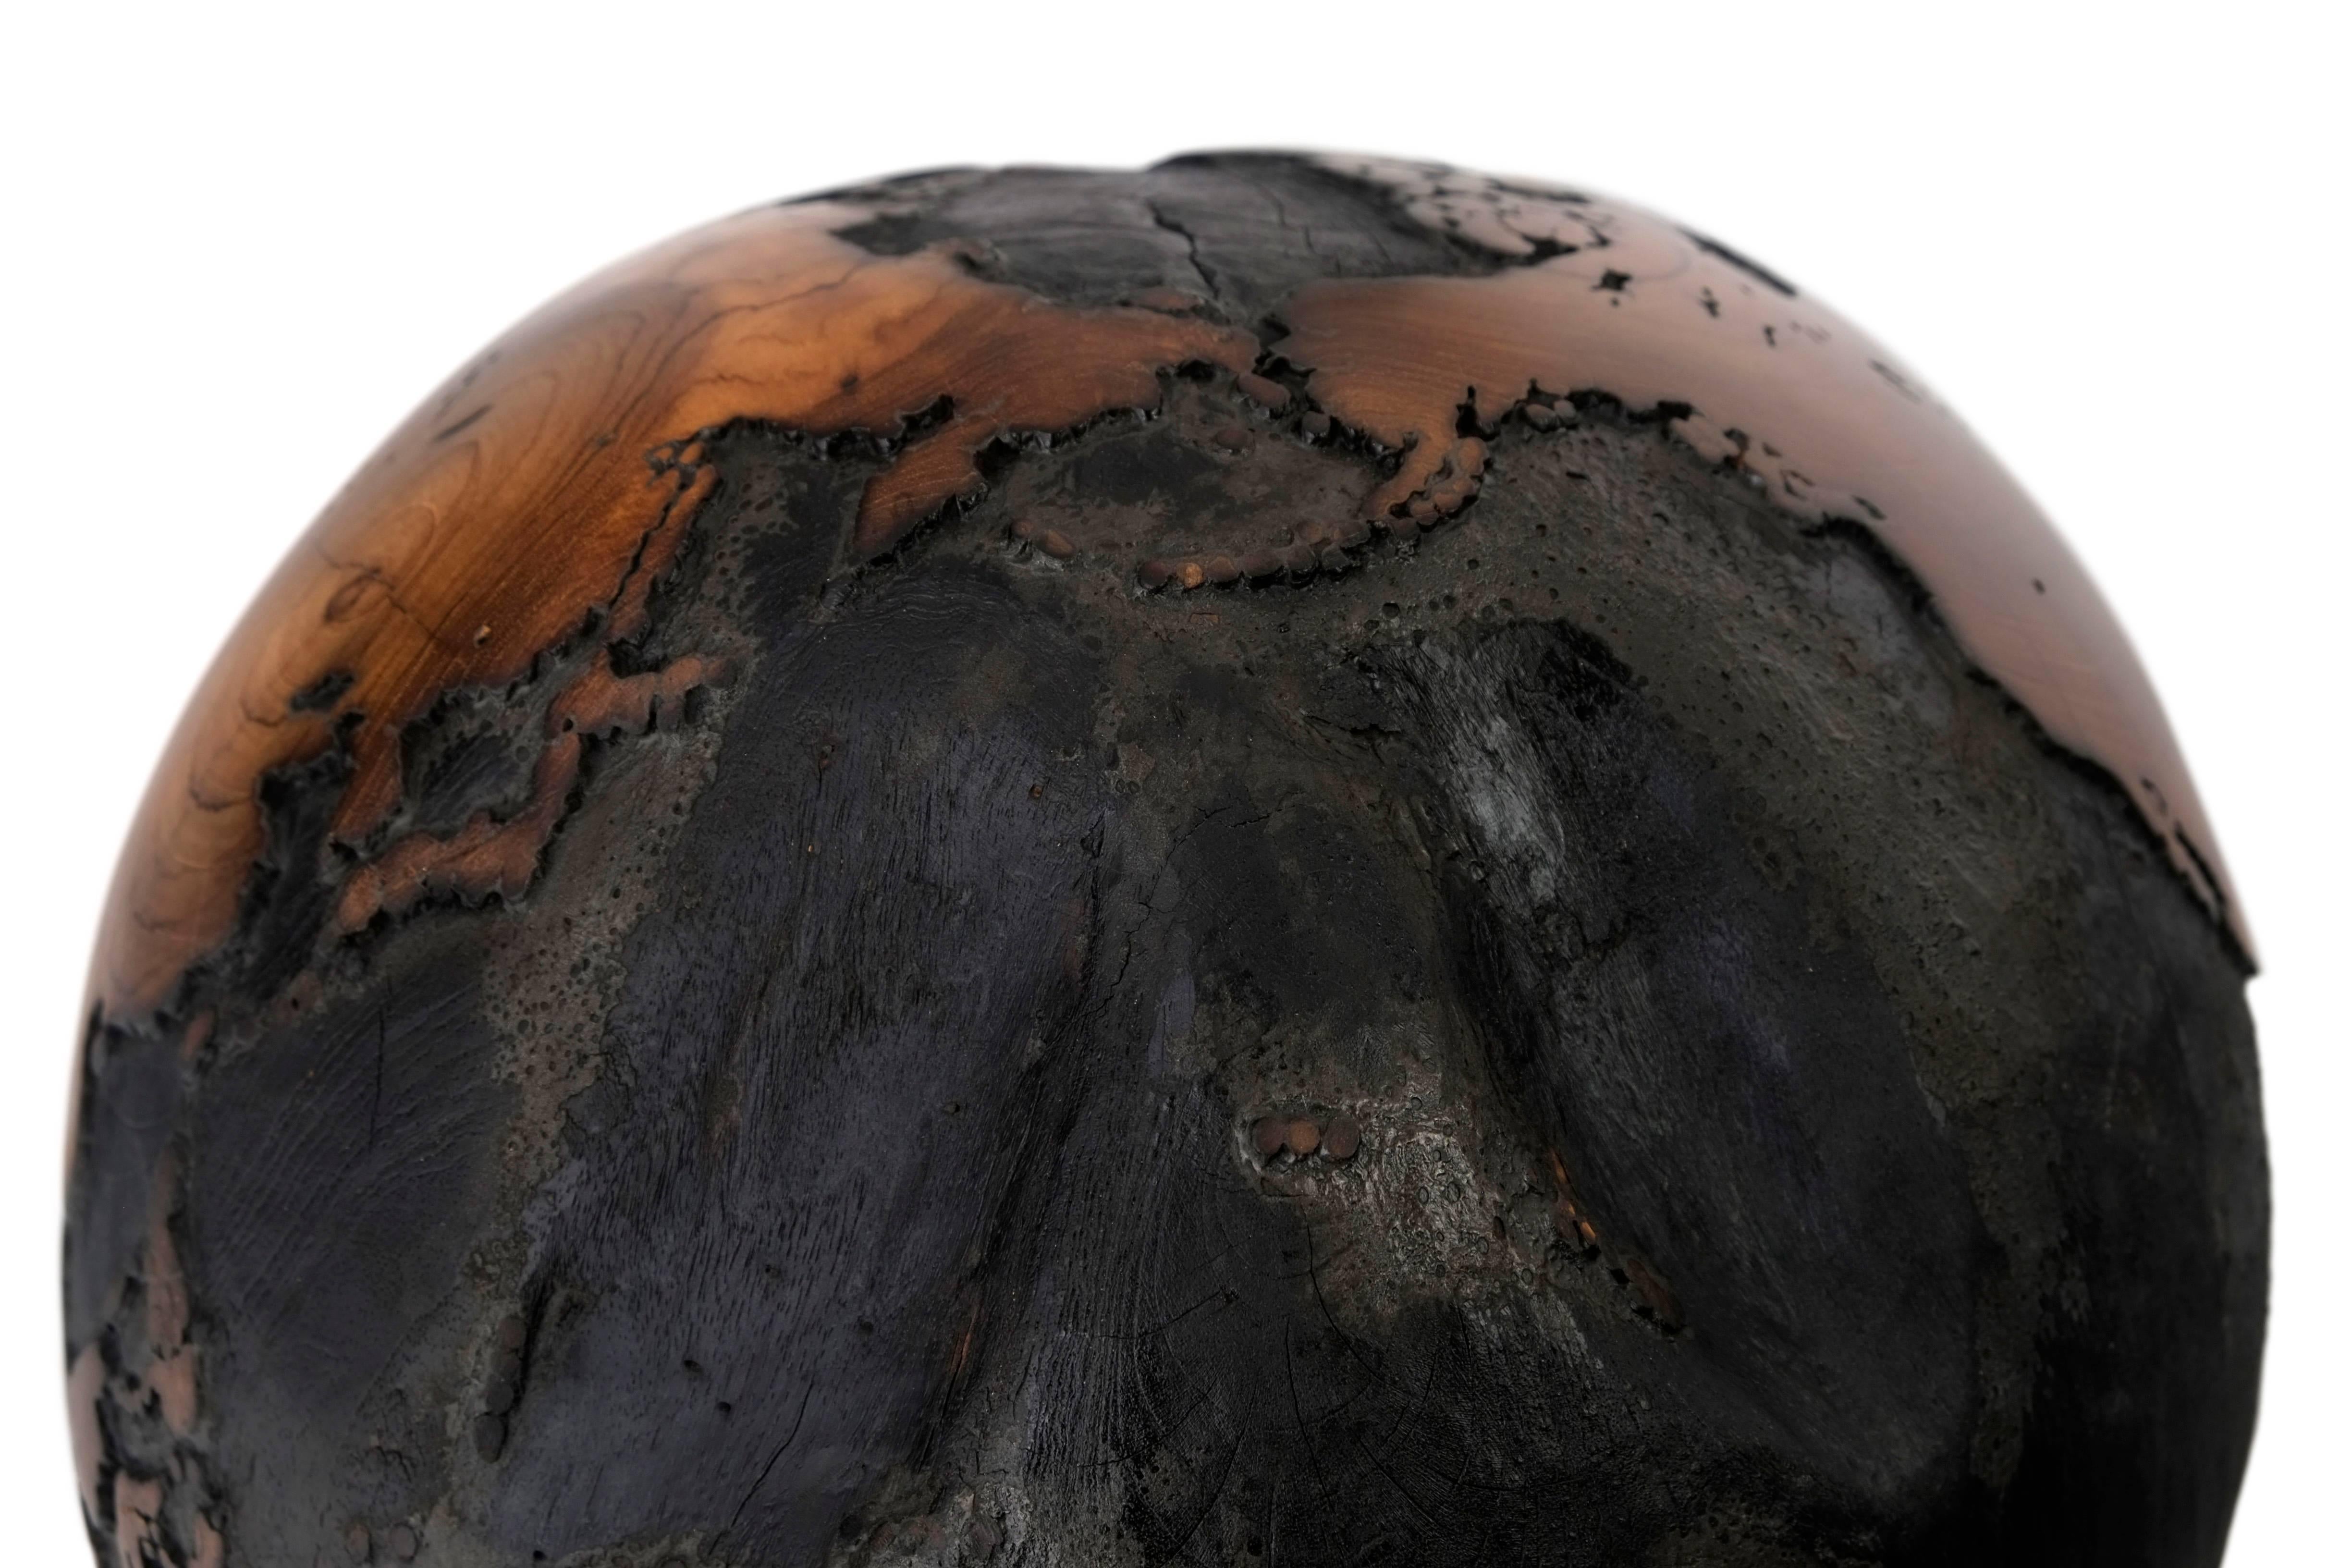 Contemporary Brulee, HB Globe Teak Root with Burnt Finishing 30cm, Saturday Sale 3